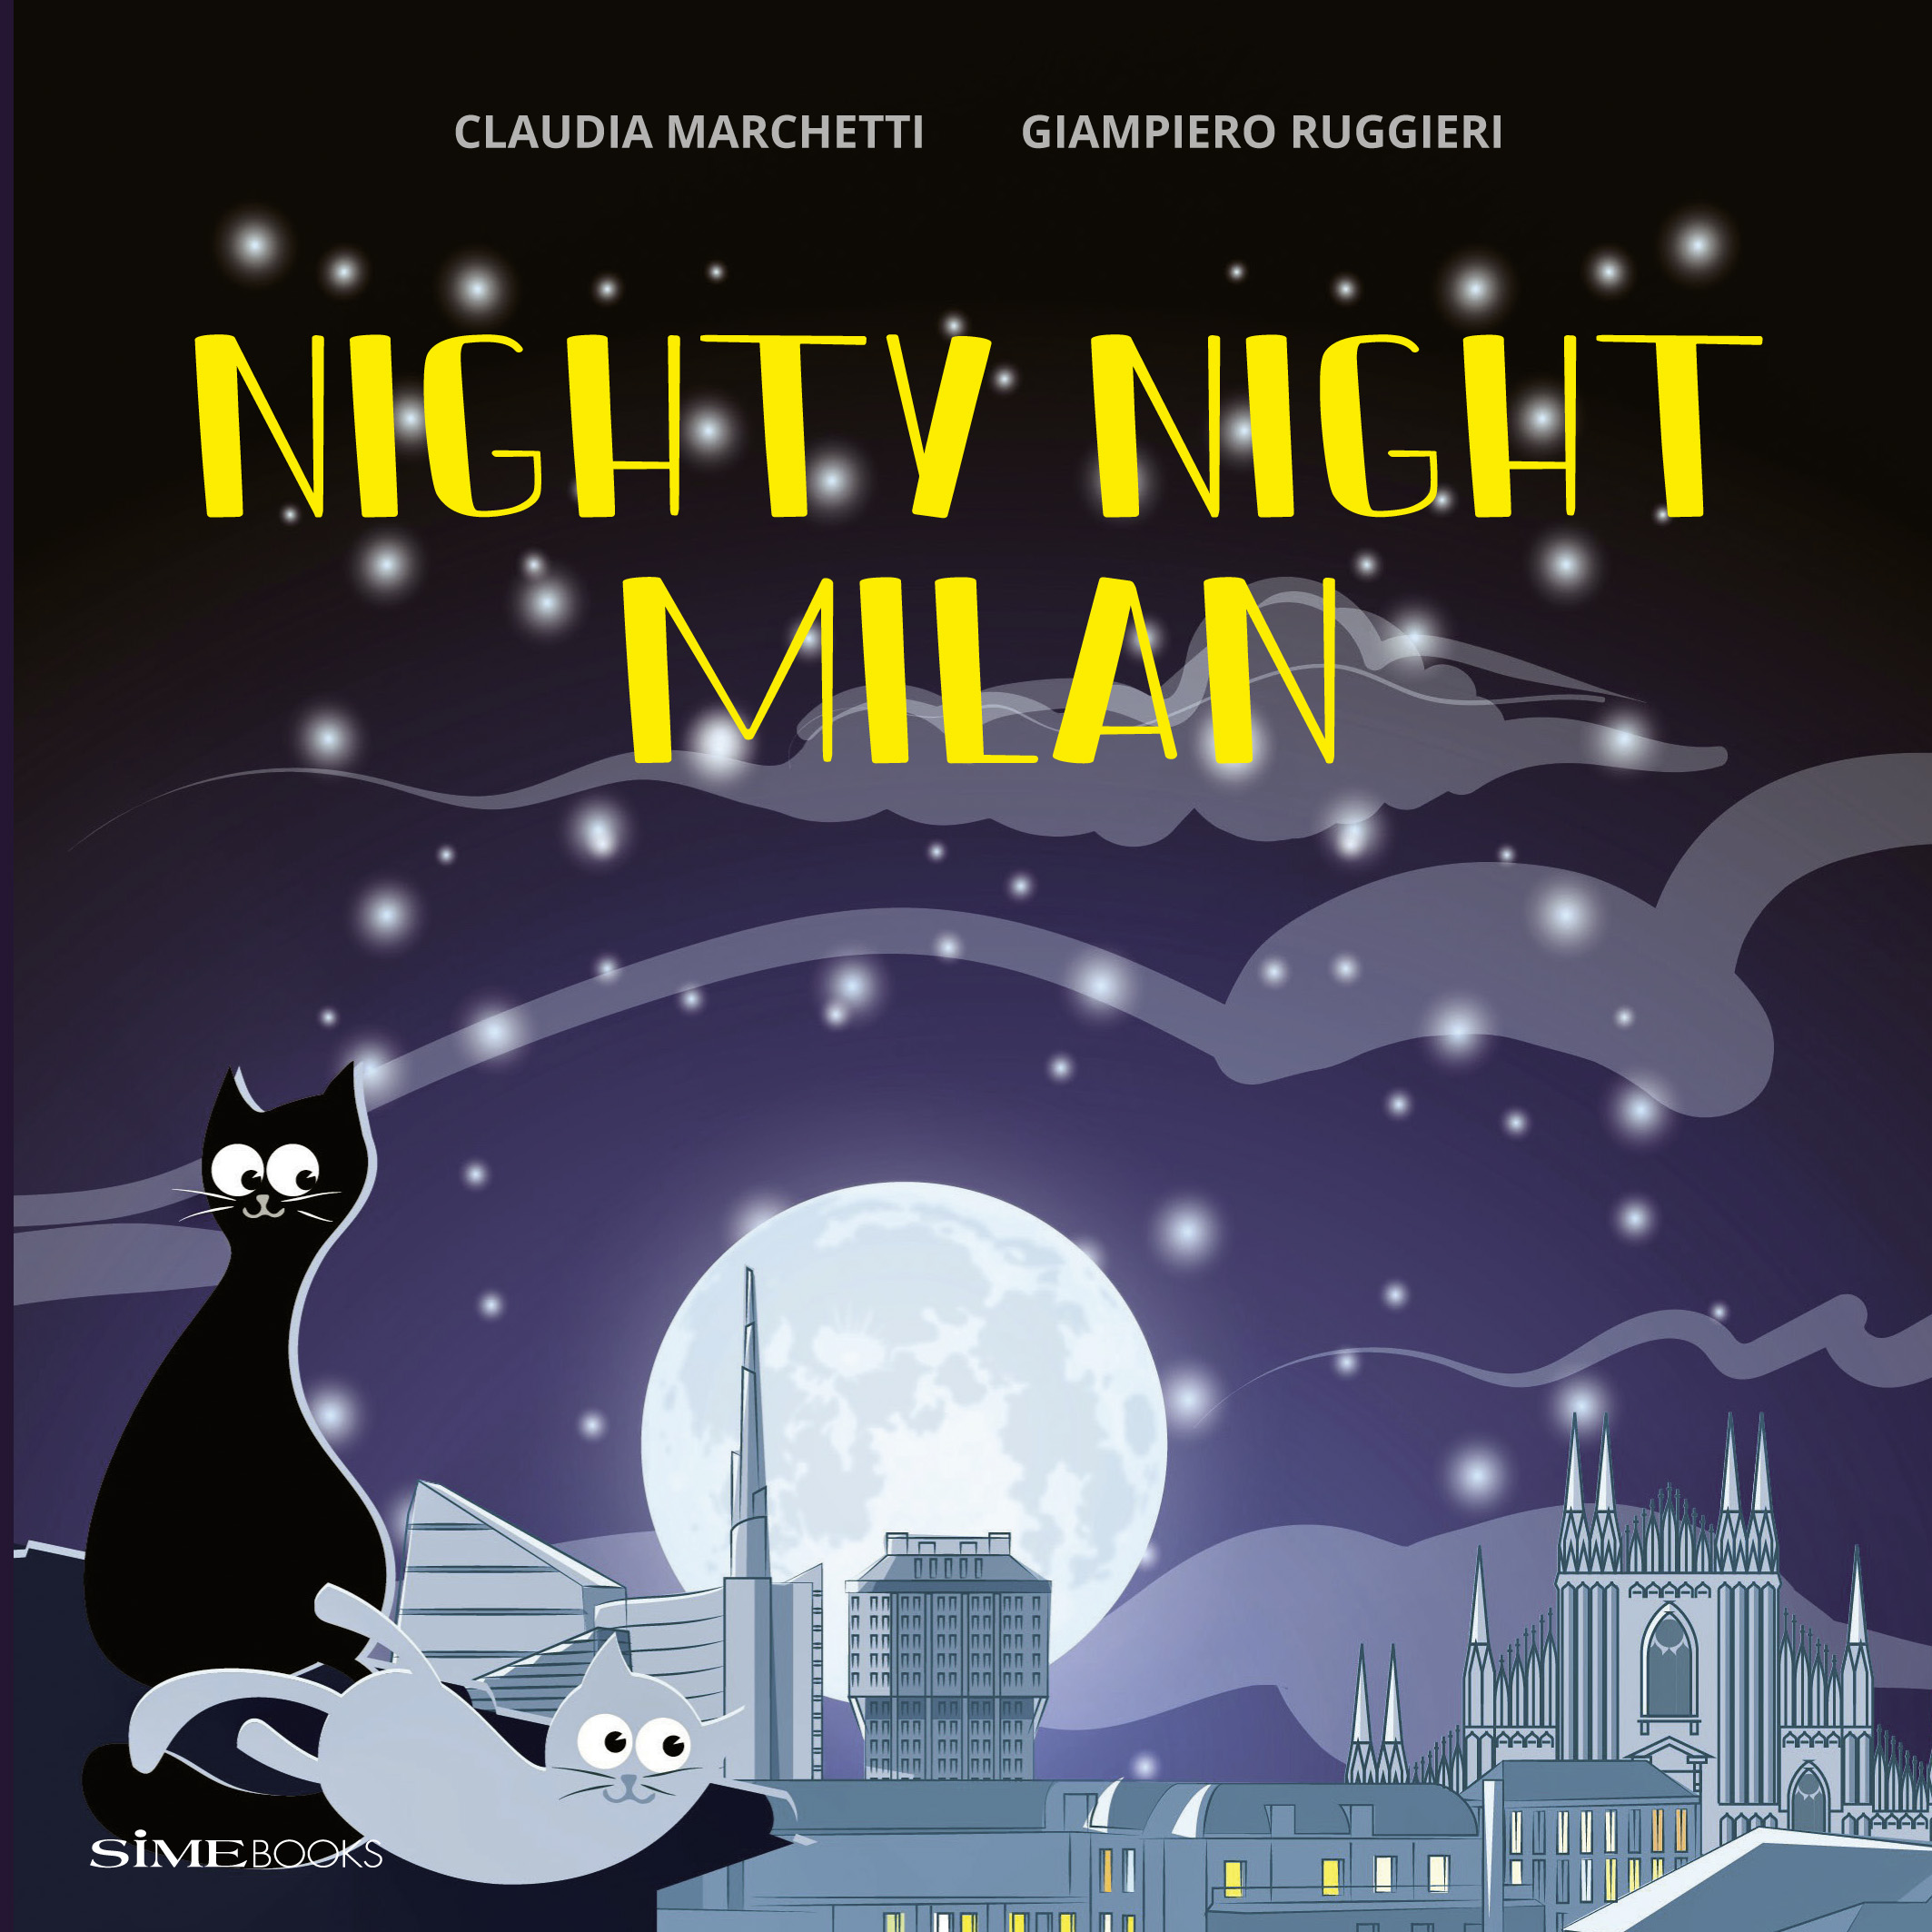 New Images > Nighty Night Milan Follow Peppe and Bianca to discover the city and its secrets